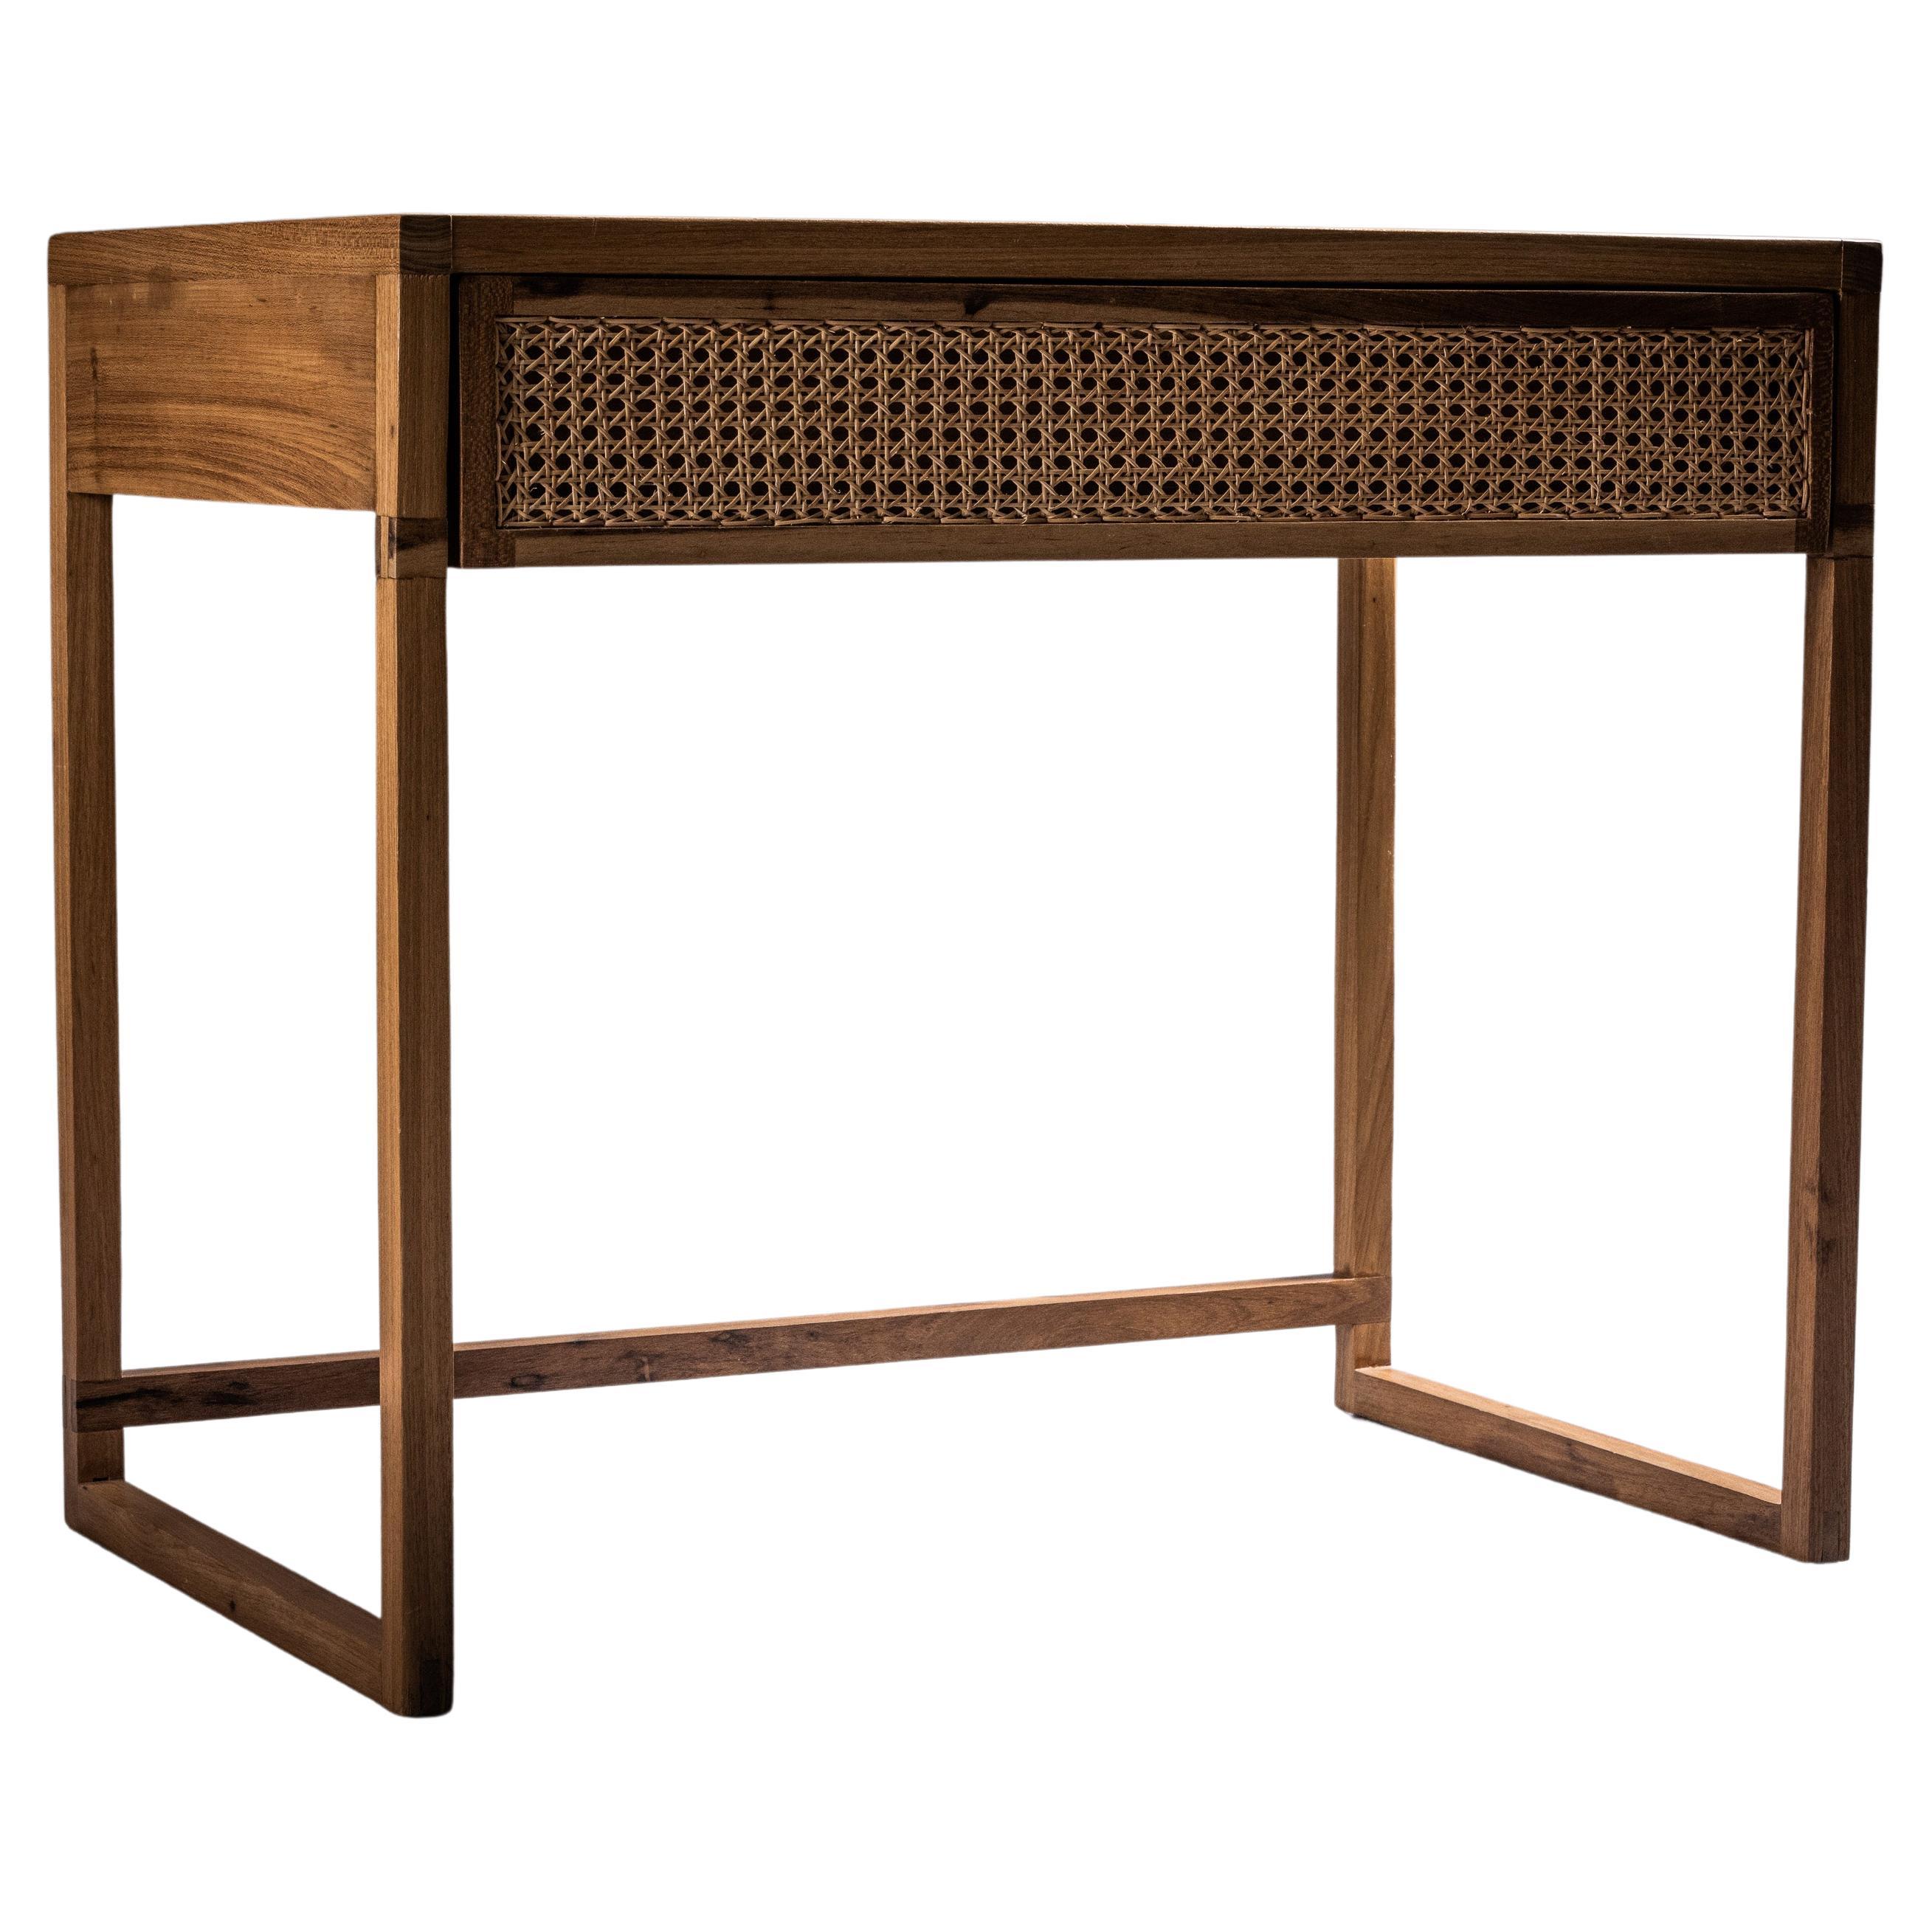 The Square Desk. Brazilian Solid Wood Writing Table Design by Amilcar Oliveira